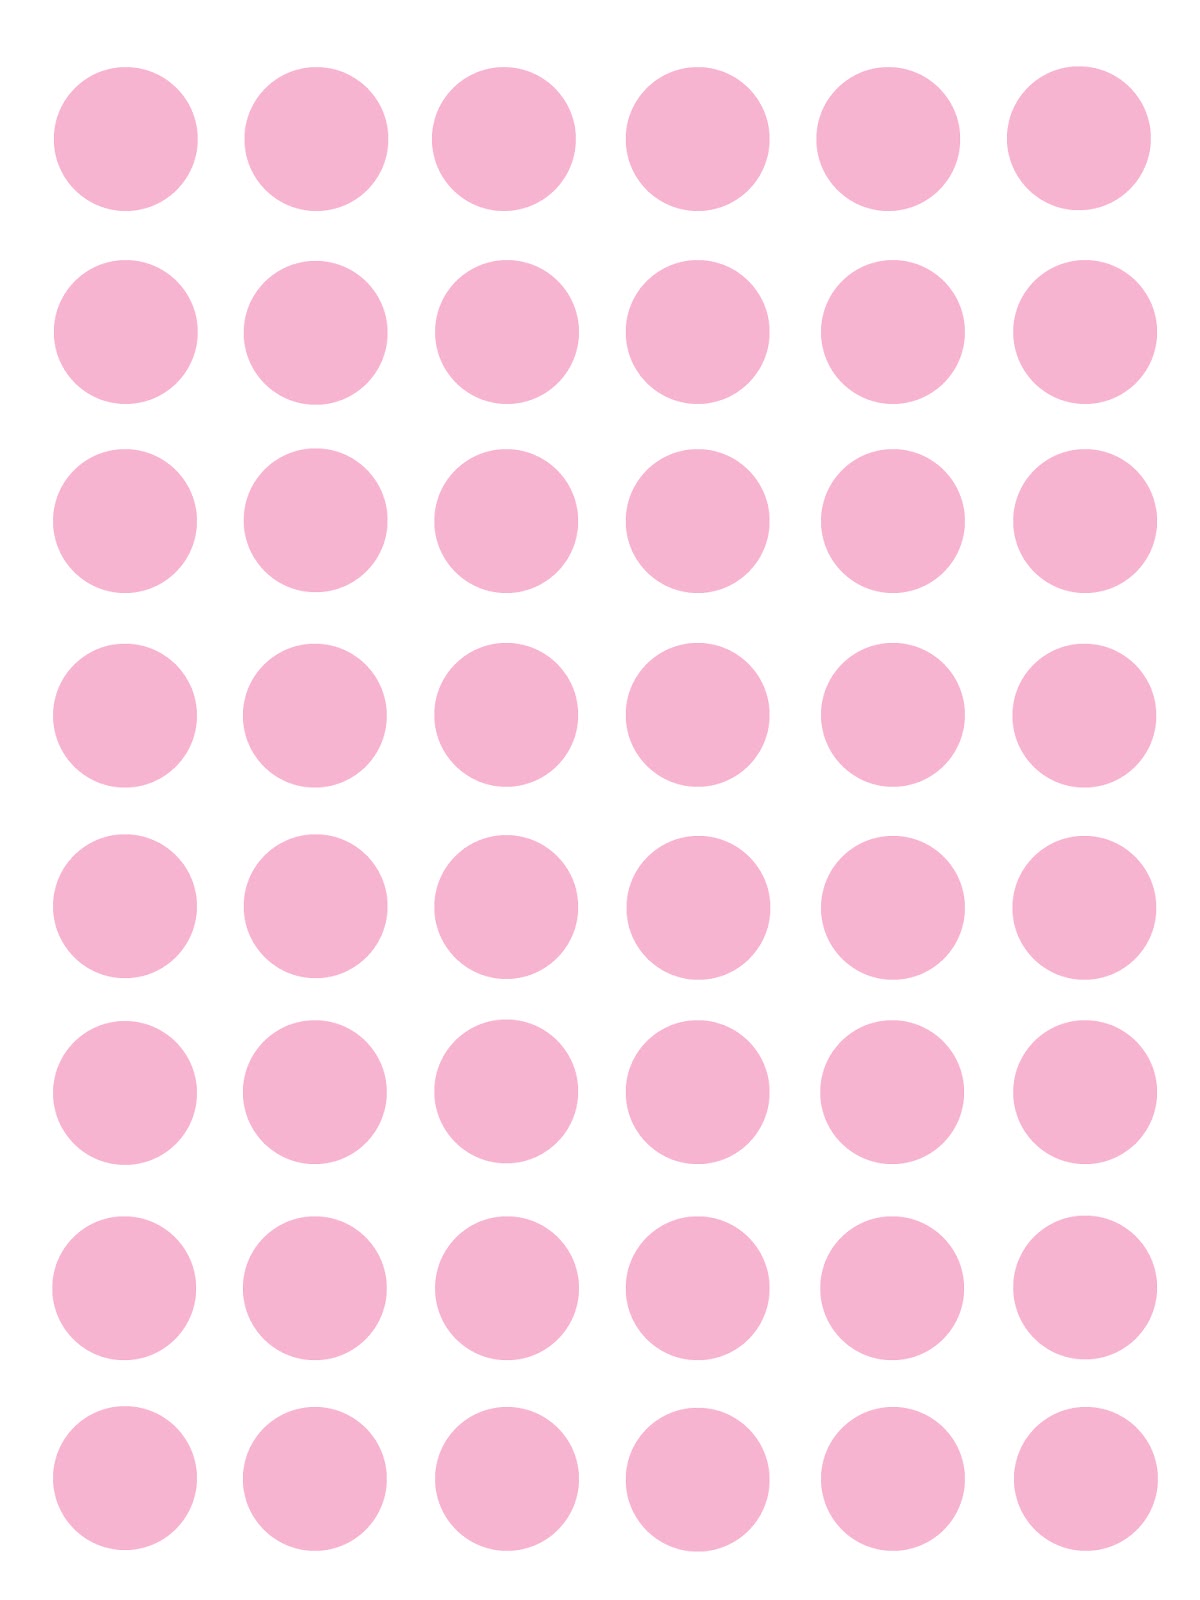 Pink And White Polka Dot Wallpaper - ClipArt Best